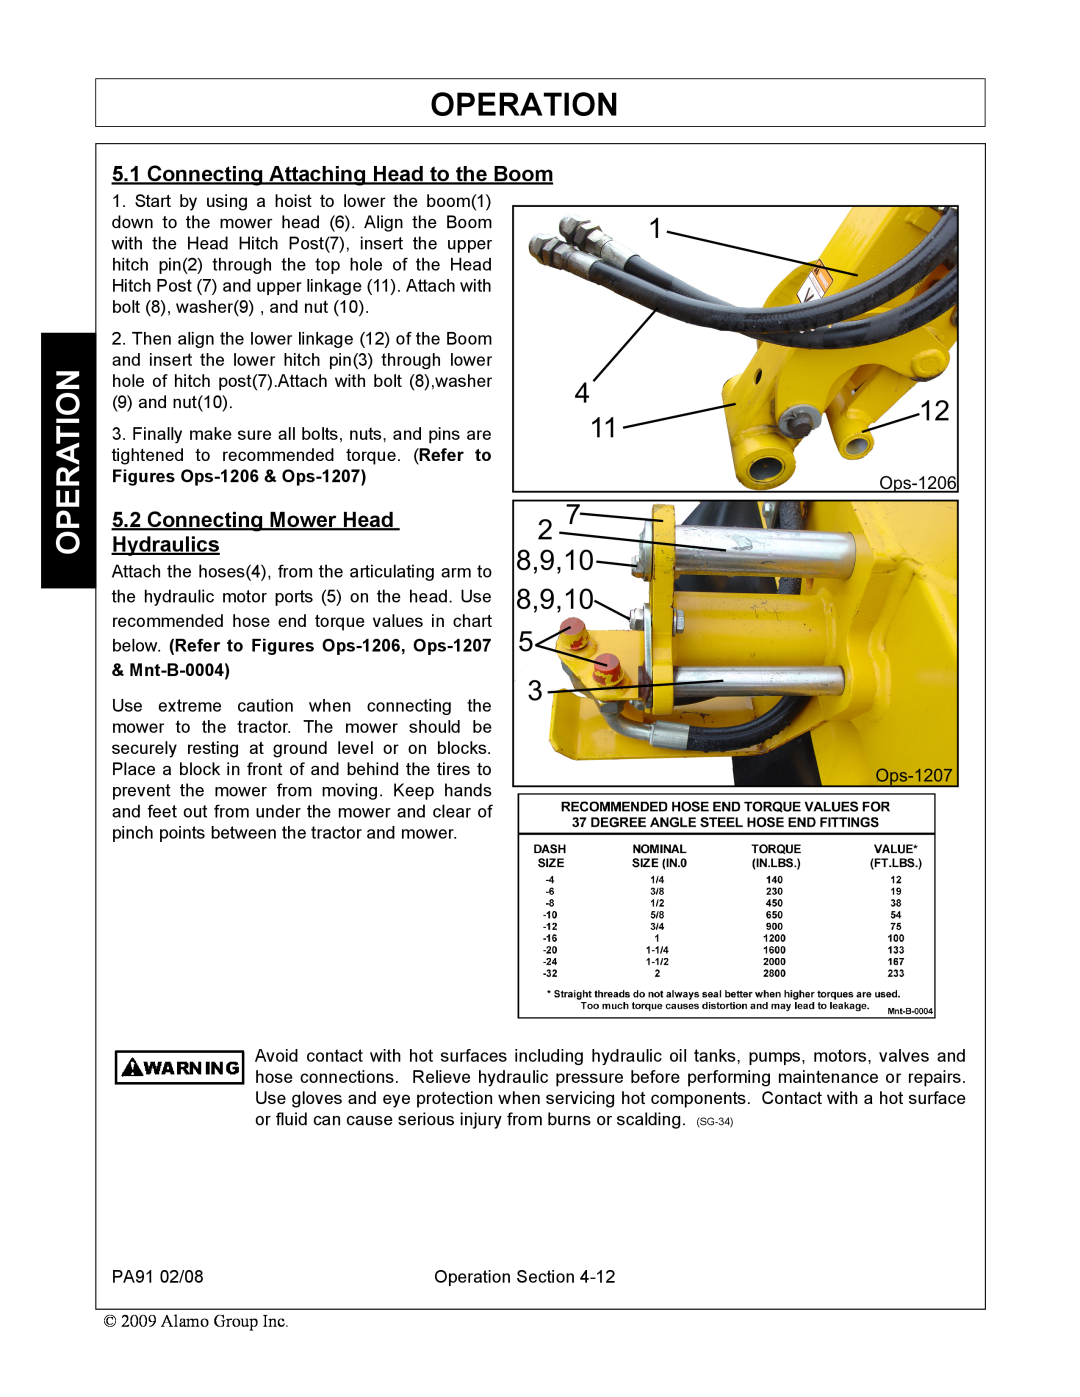 Alamo 7191852C manual Connecting Attaching Head to the Boom, 5.2Connecting Mower Head Hydraulics, Operation 